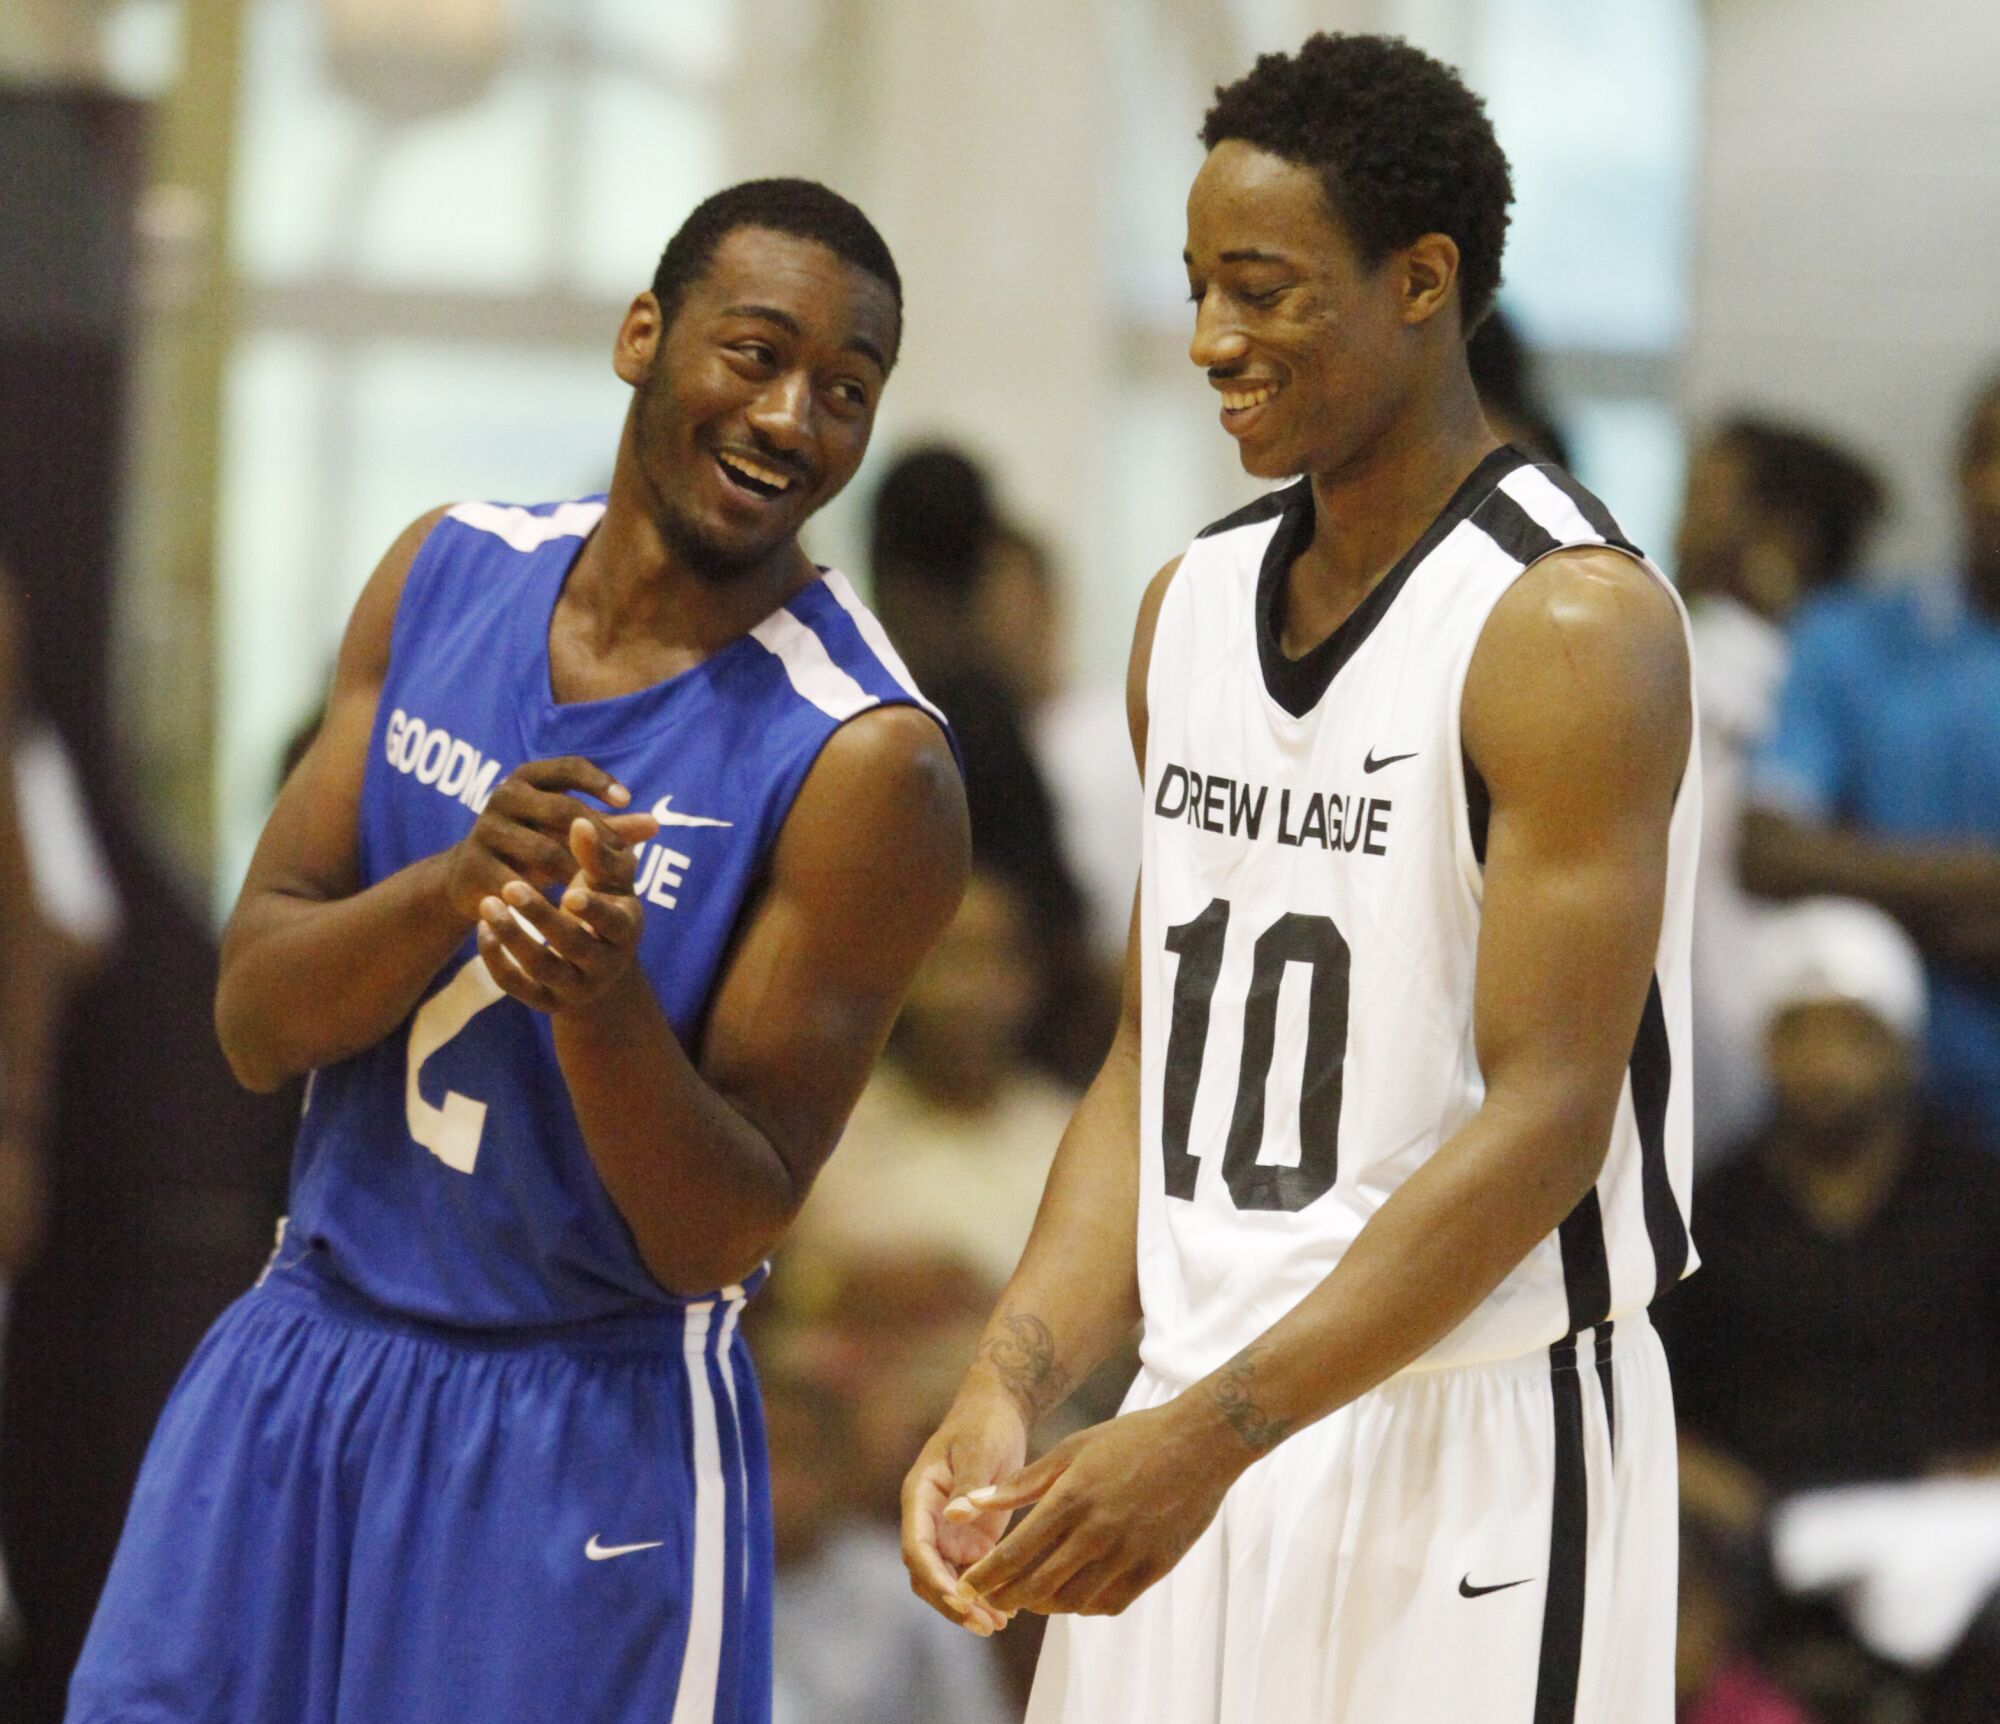 John Wall chats with DeMar DeRozan during an exhibition game between Goodman League and Drew League teams in 2011.